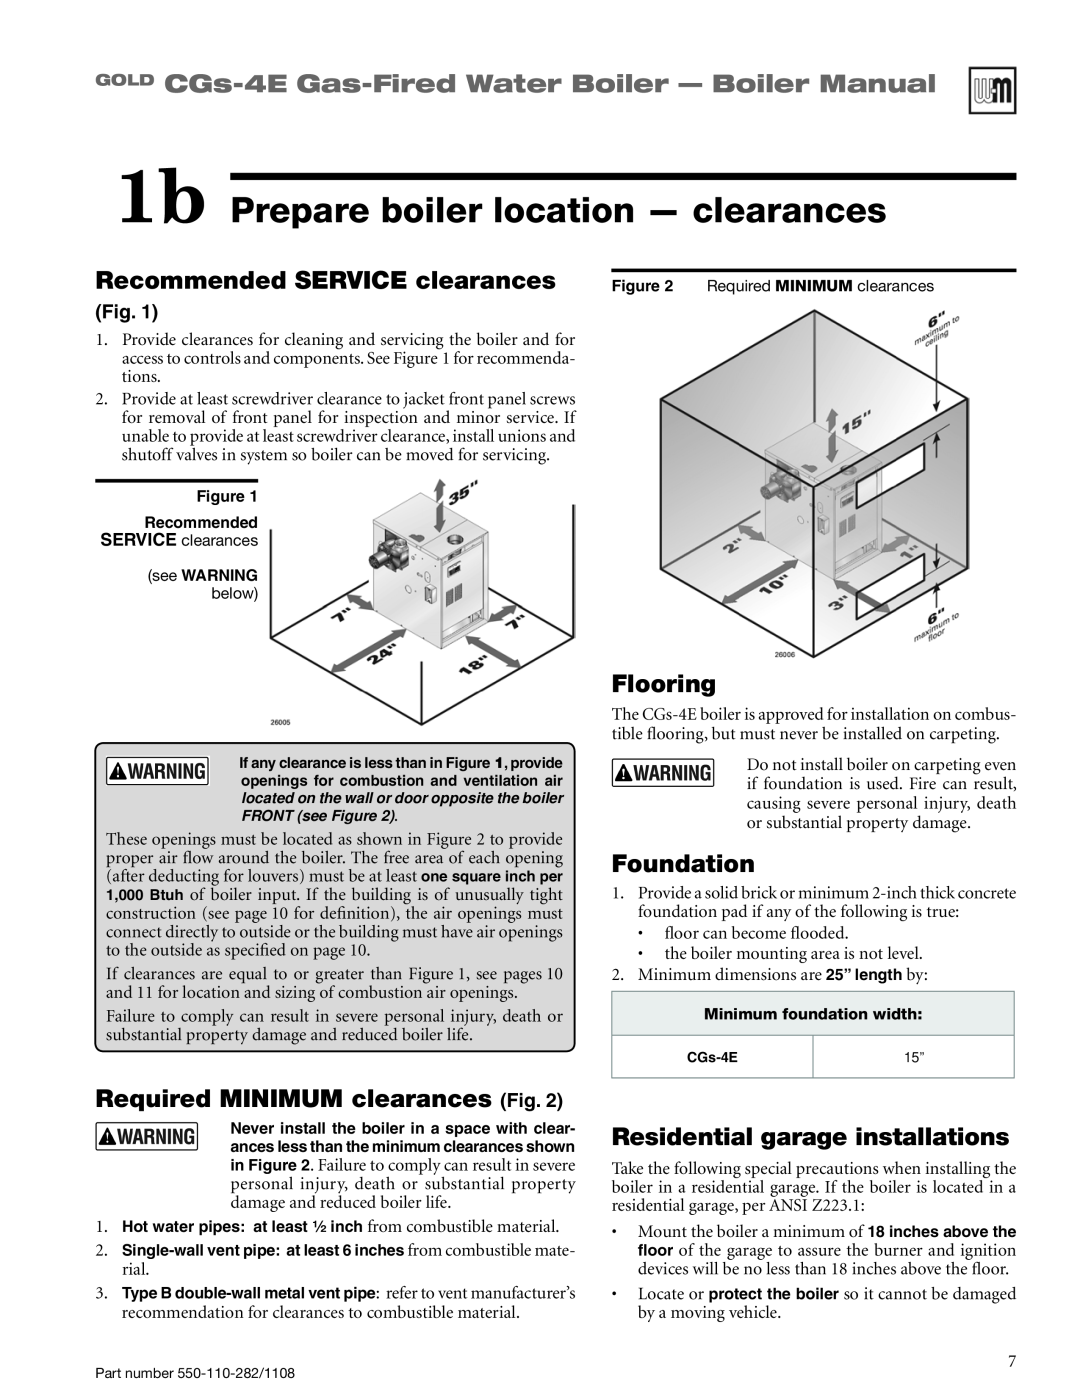 Weil-McLain CGS-4E manual 1b Prepare boiler location - clearances, Recommended SERVICE clearances, Flooring, Foundation 